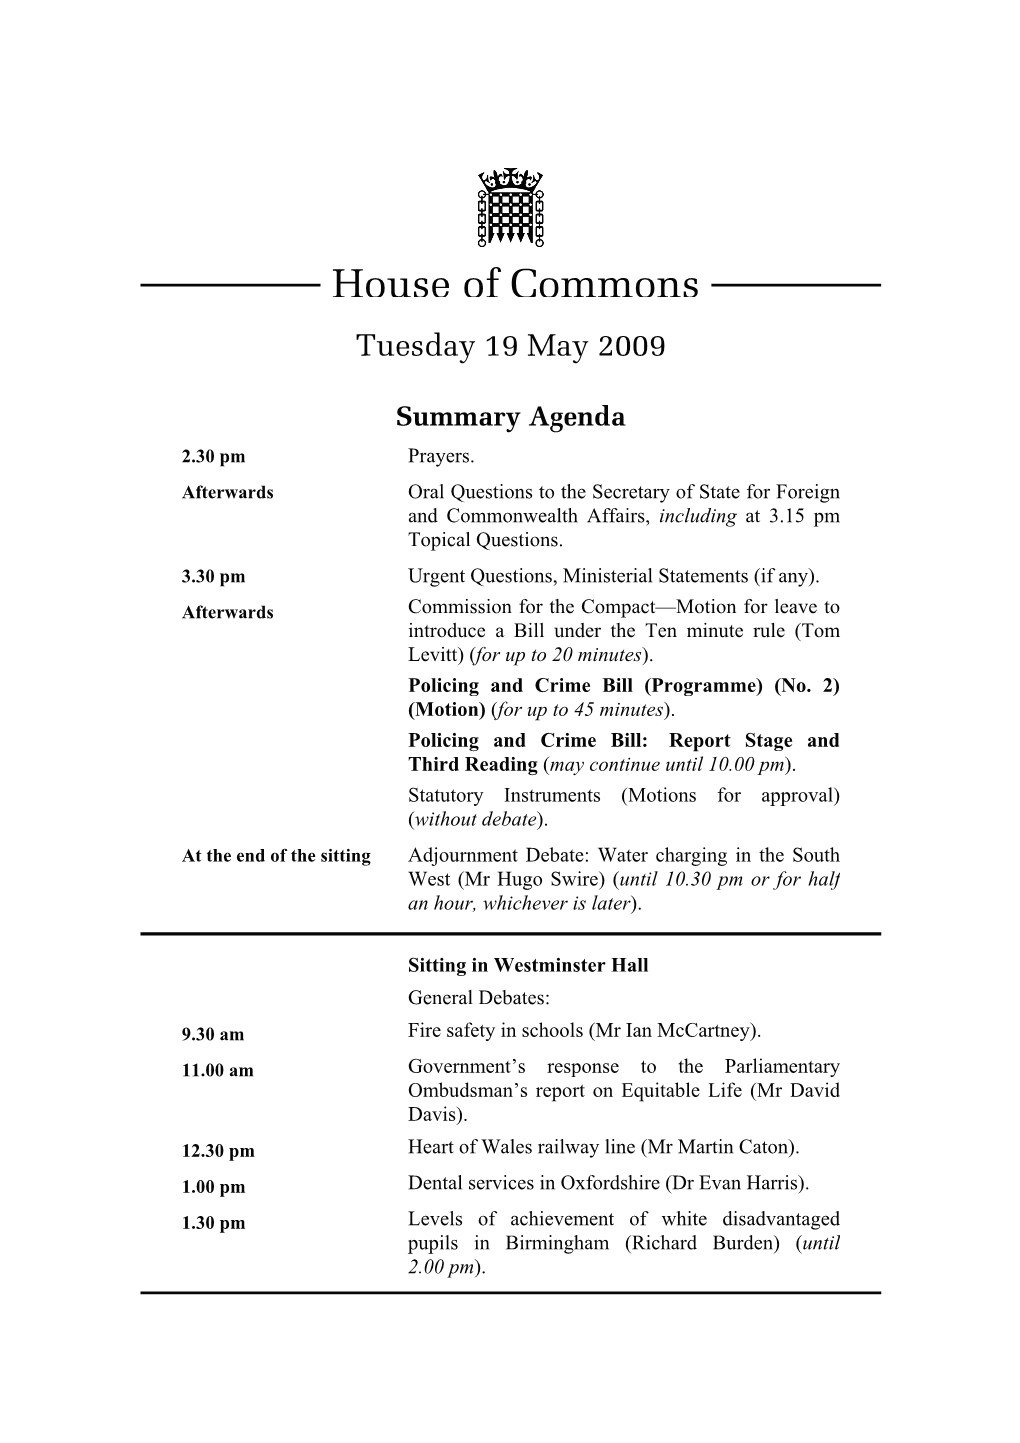 House of Commons Tuesday 19 May 2009